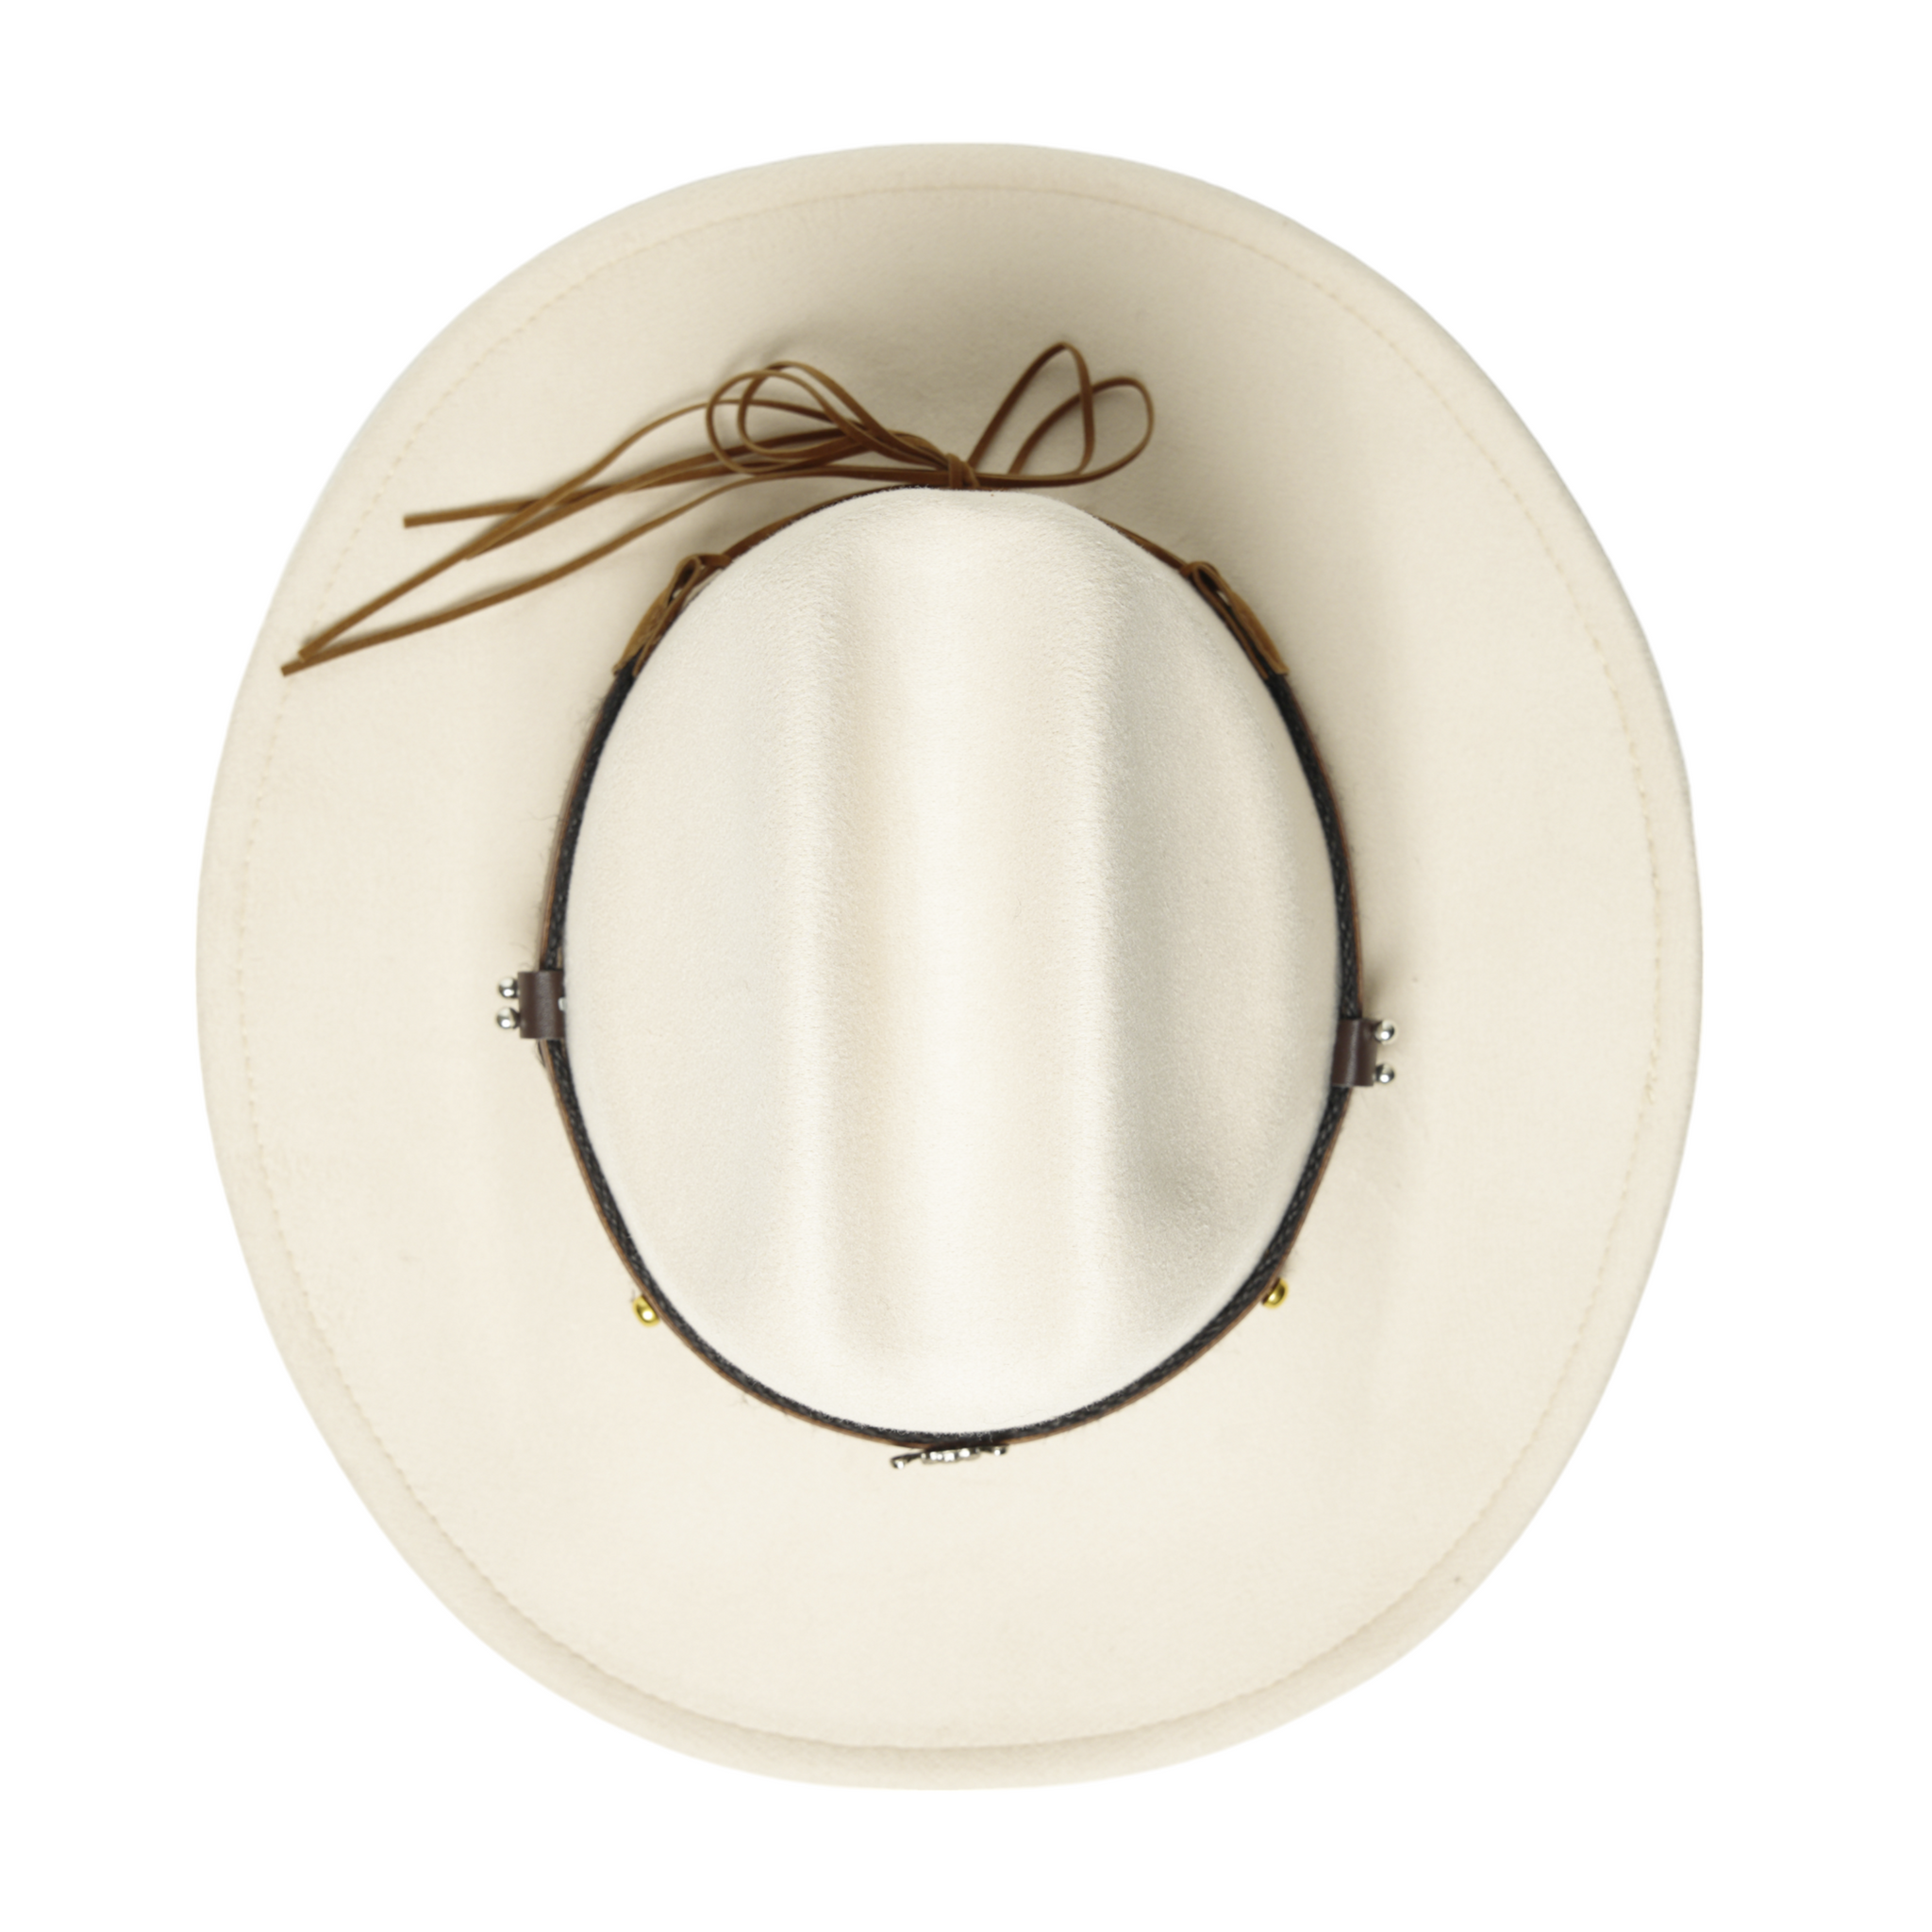 Chokore Pinched Cowboy Hat with Ox head belt  (Off White)